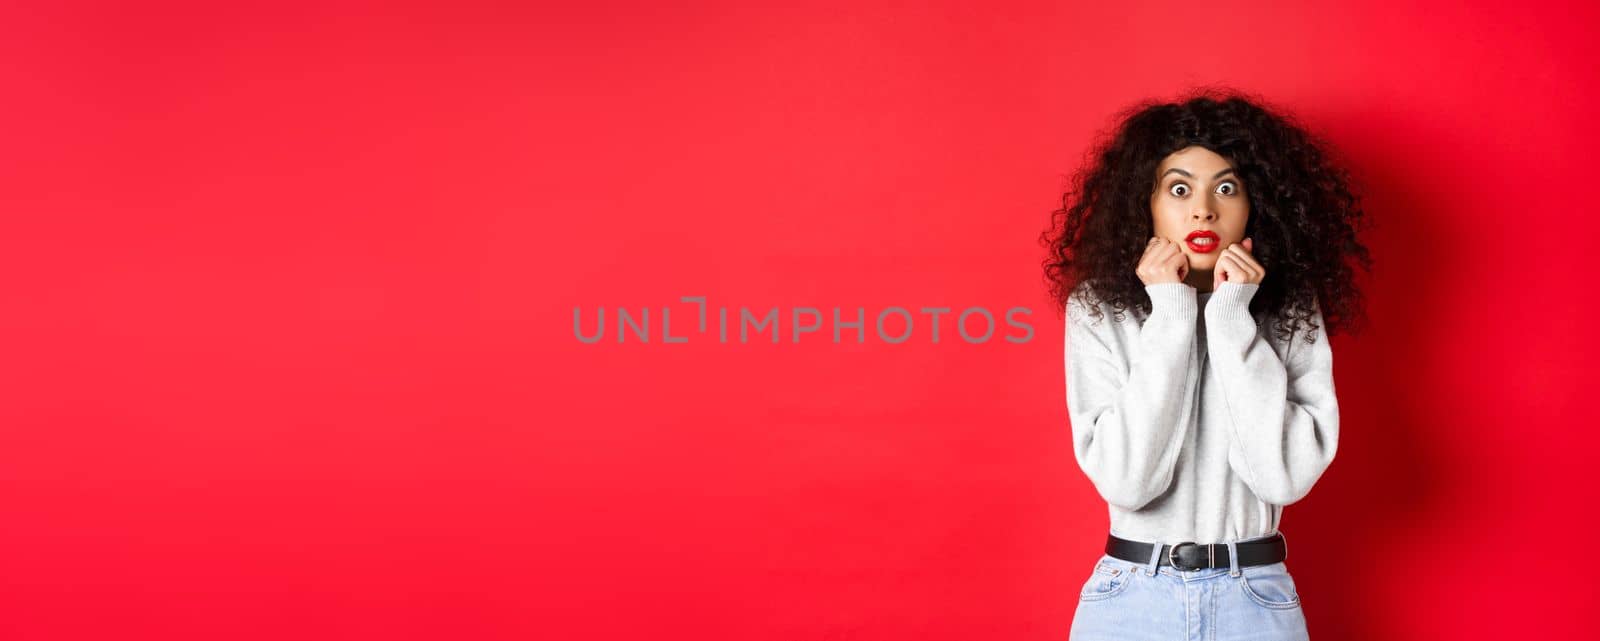 Shocked caucasian woman with curly hairstyle, looking at something impressive, gasping amazed, checking out promo offer, red background.